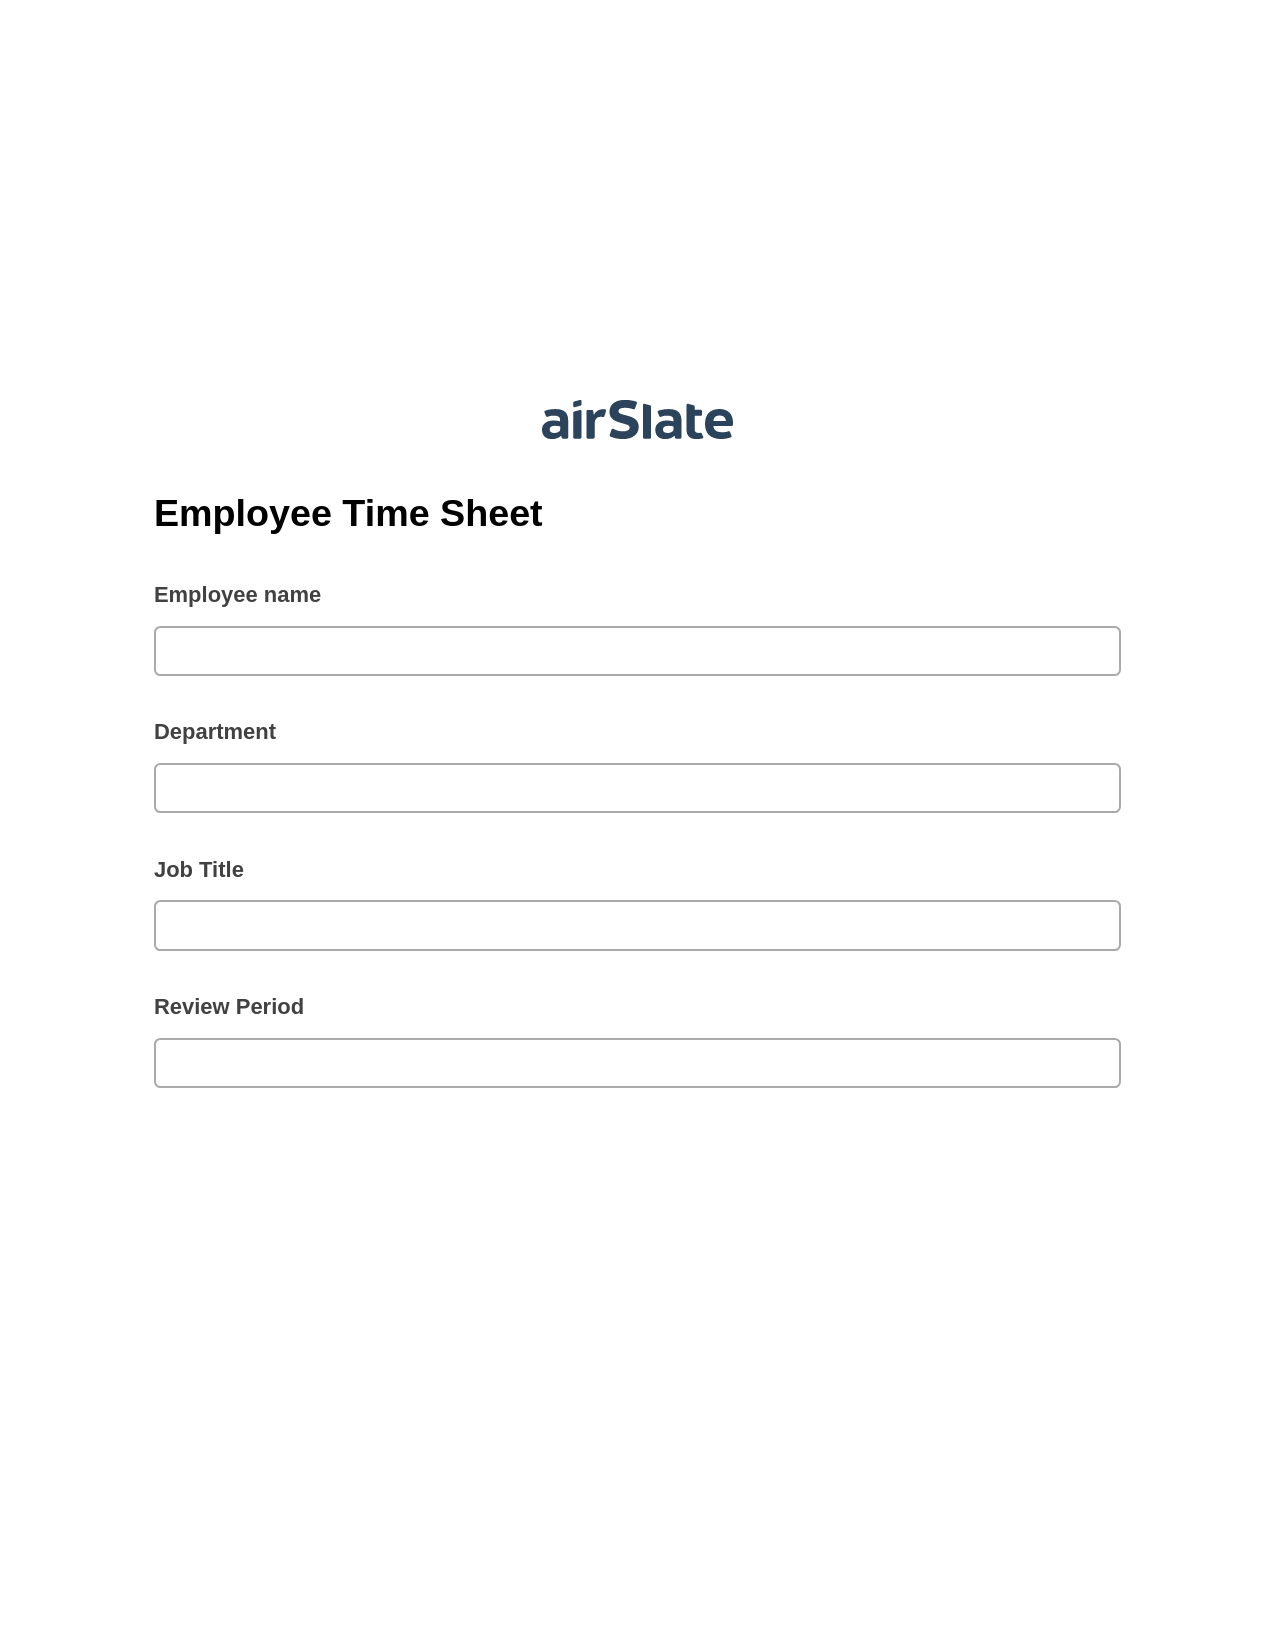 Multirole Employee Time Sheet Pre-fill from another Slate Bot, Create Salesforce Records Bot, Export to Excel 365 Bot